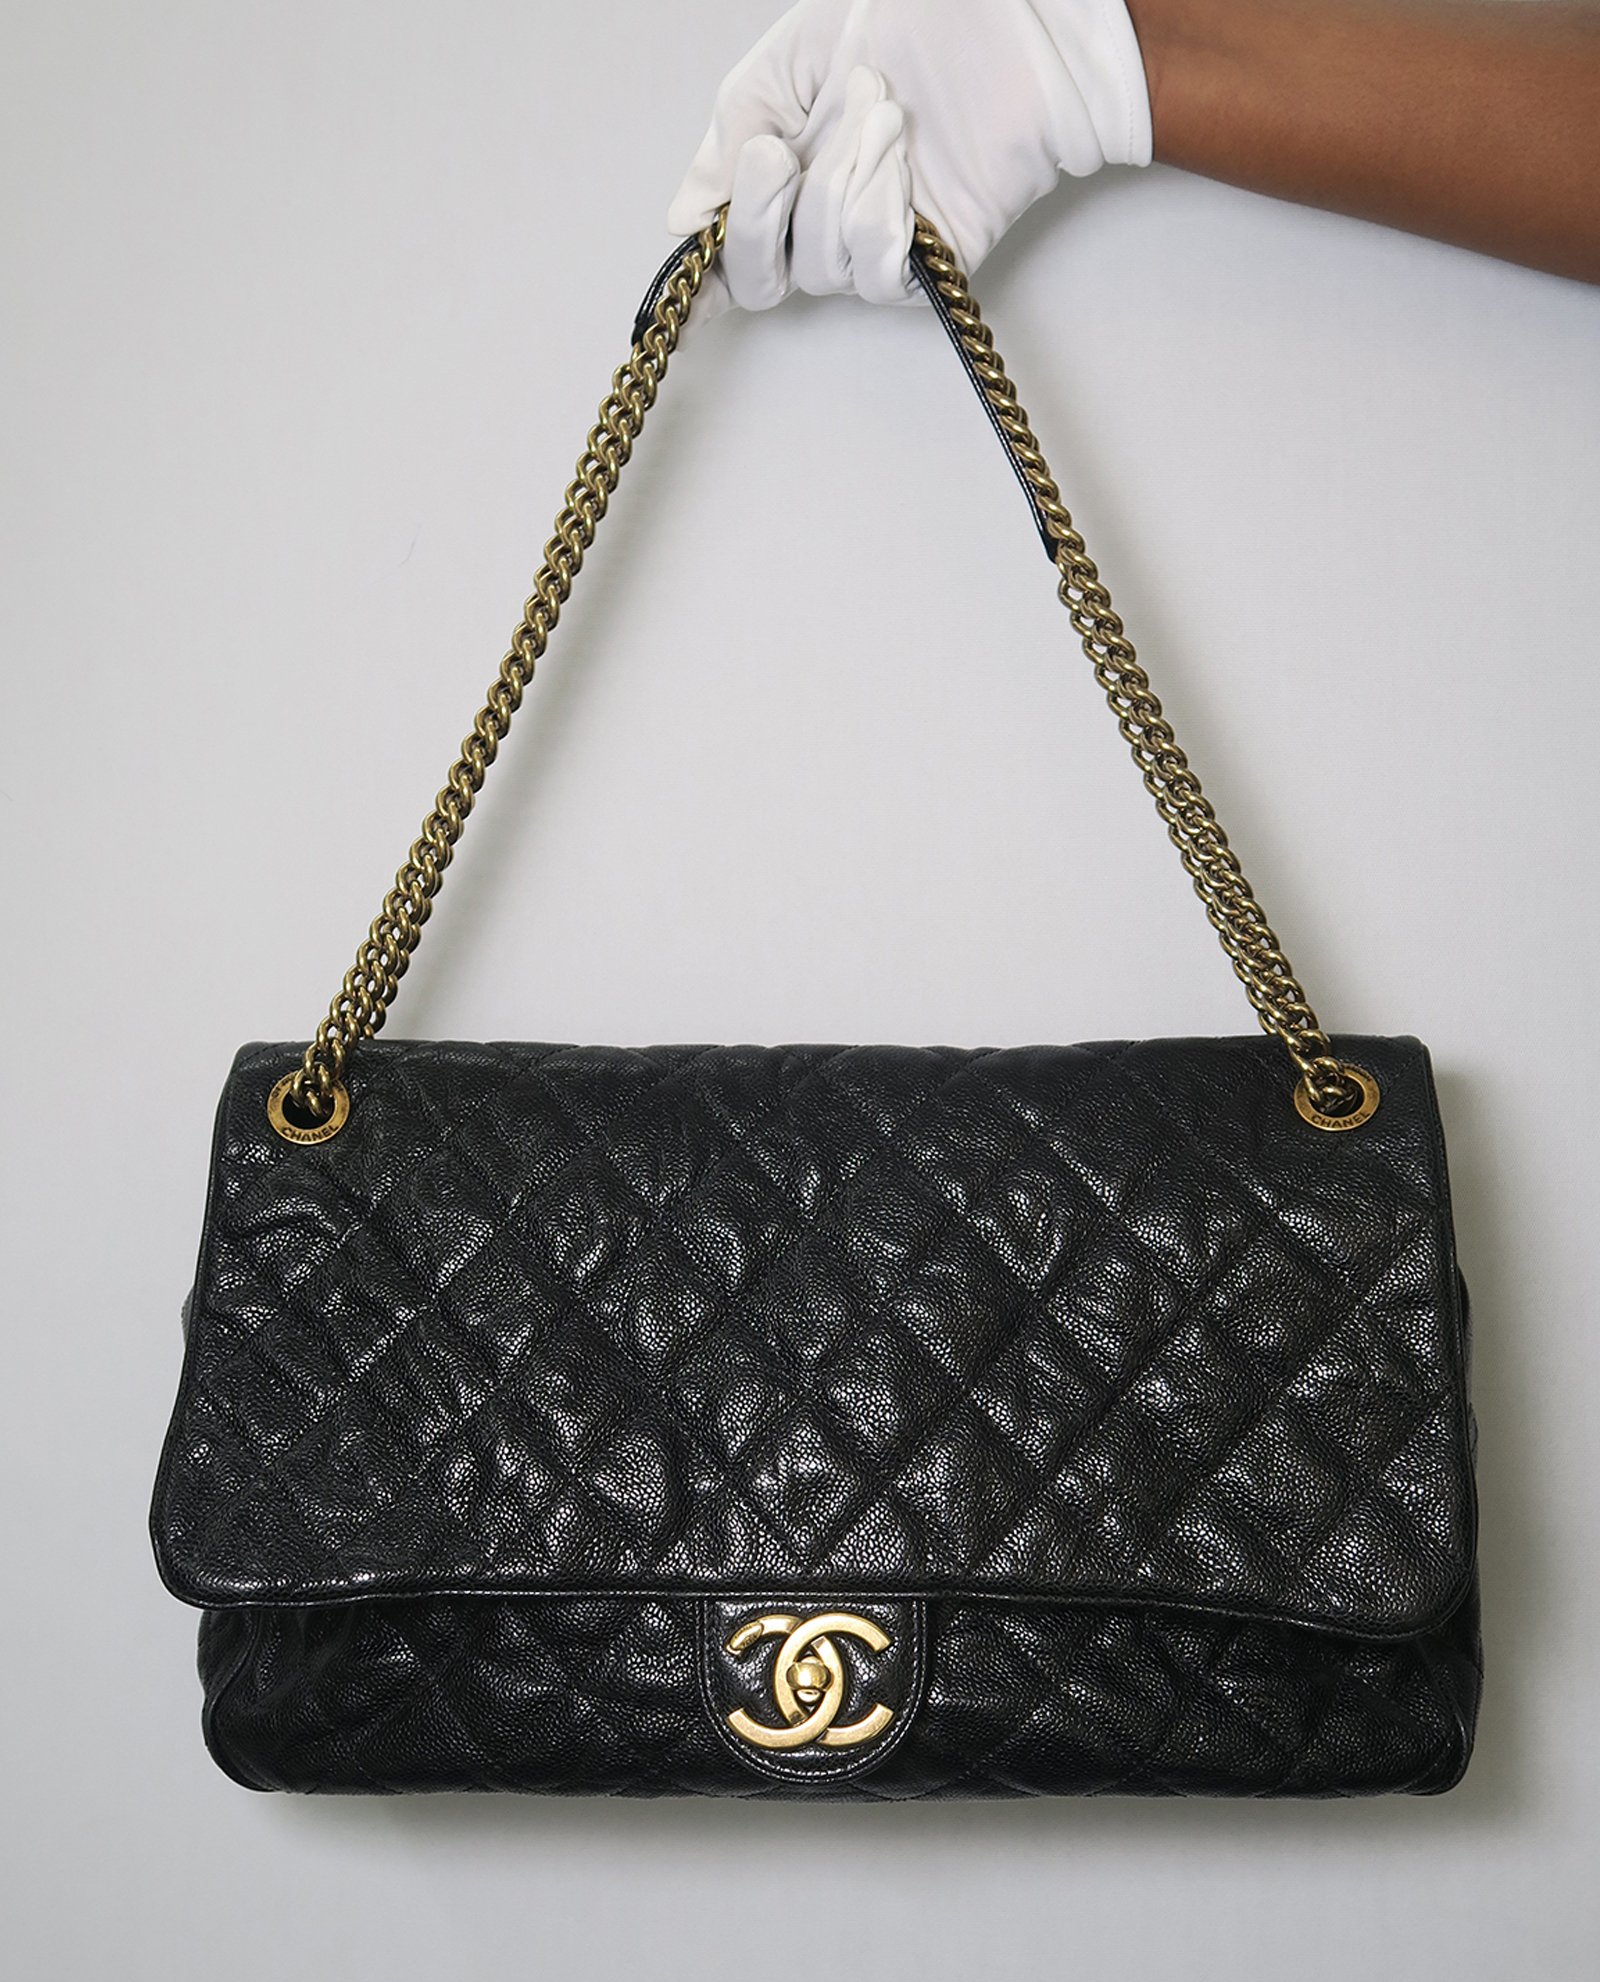 Chanel reference chart  Chanel handbags, Chanel bag outfit